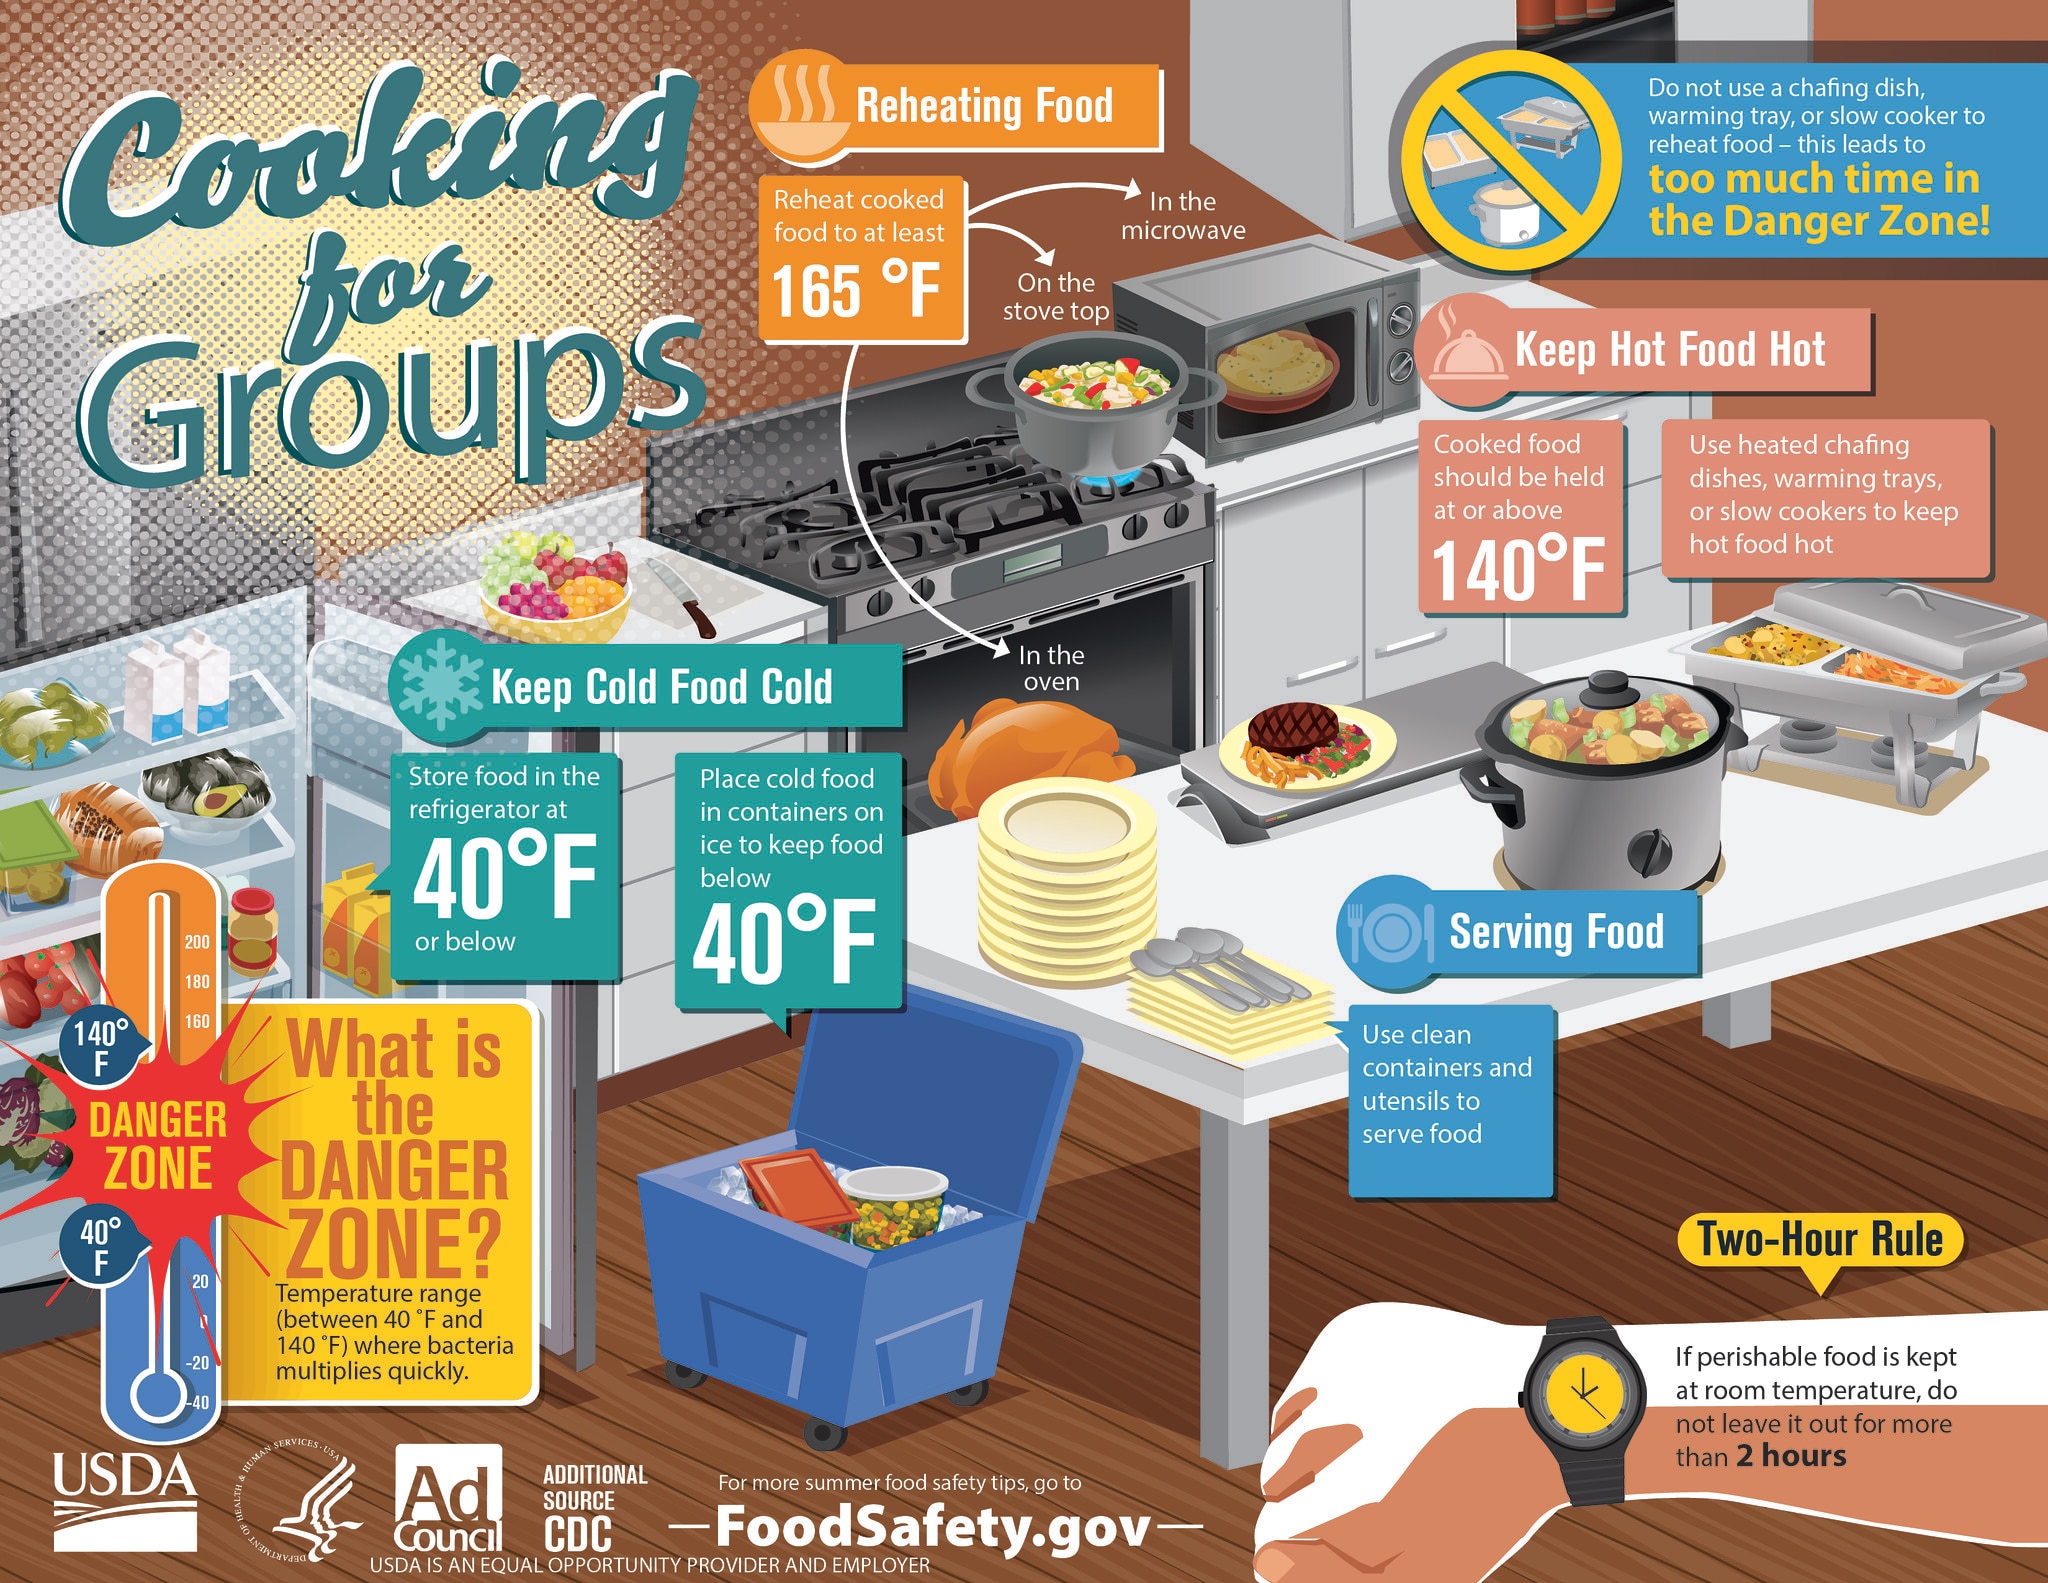 https://www.foodsafety.gov/sites/default/files/2019-05/cooking-for-large-groups-food-safety-infographic.jpg